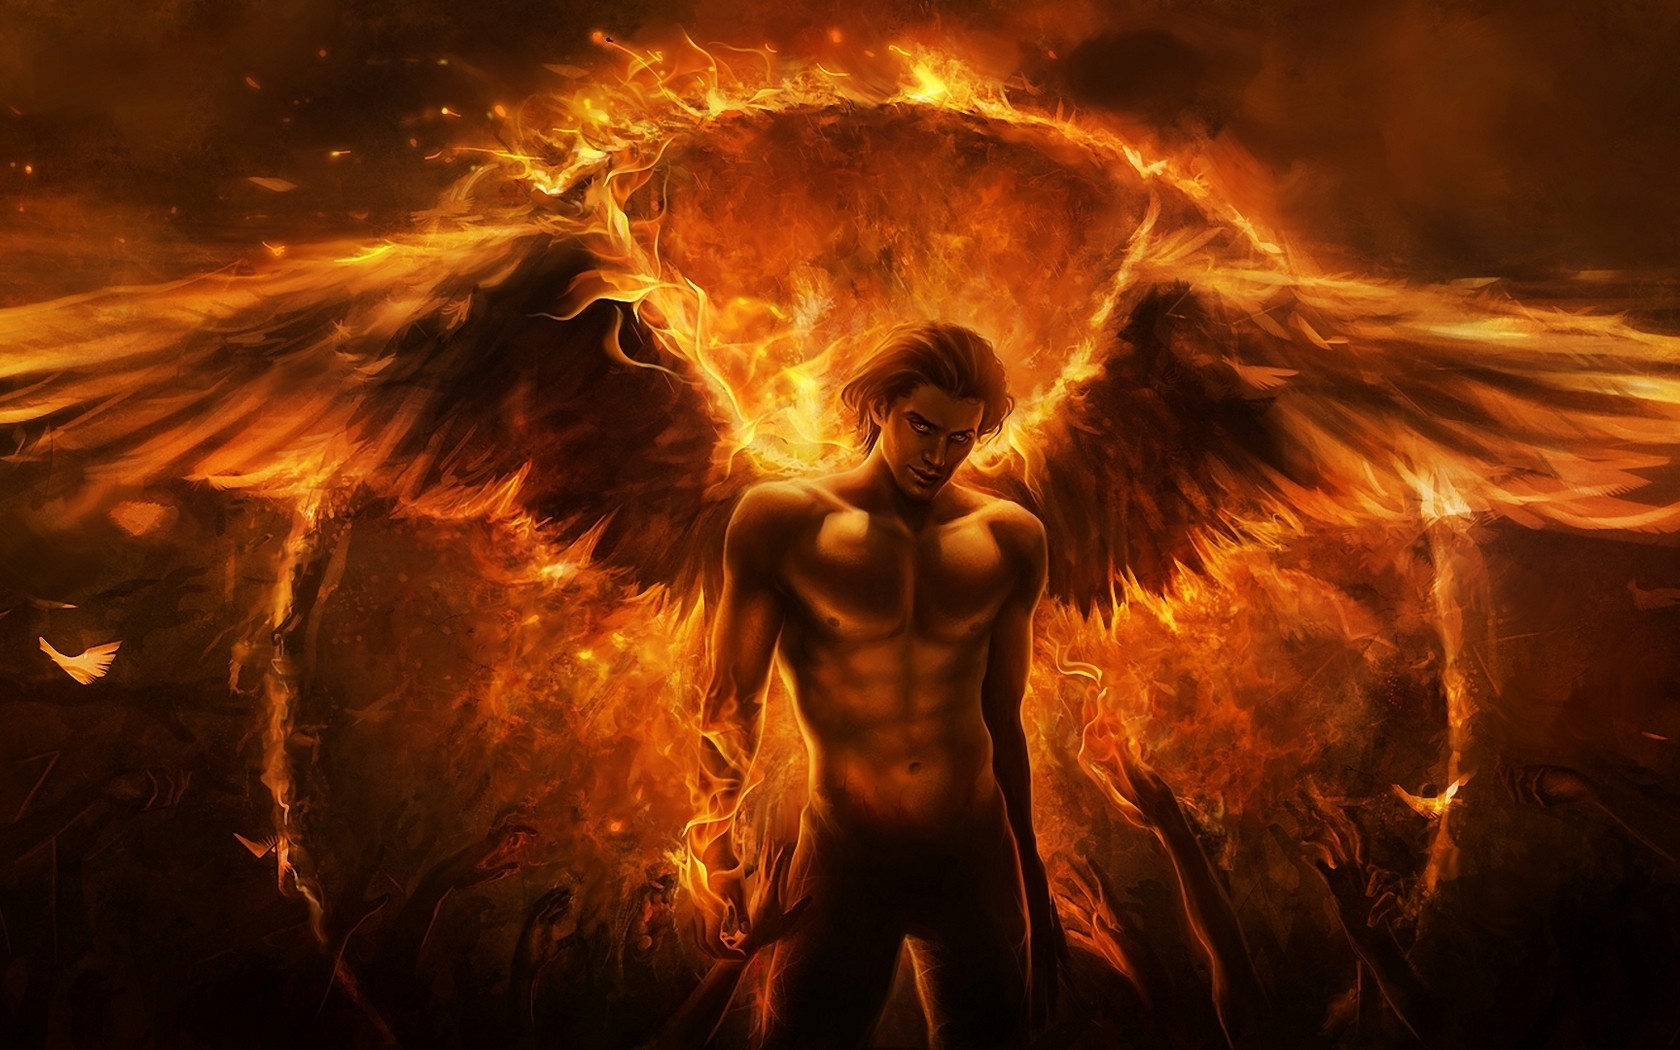 HD Wallpaper Angels Abstract Wings Fire Men Artwork By